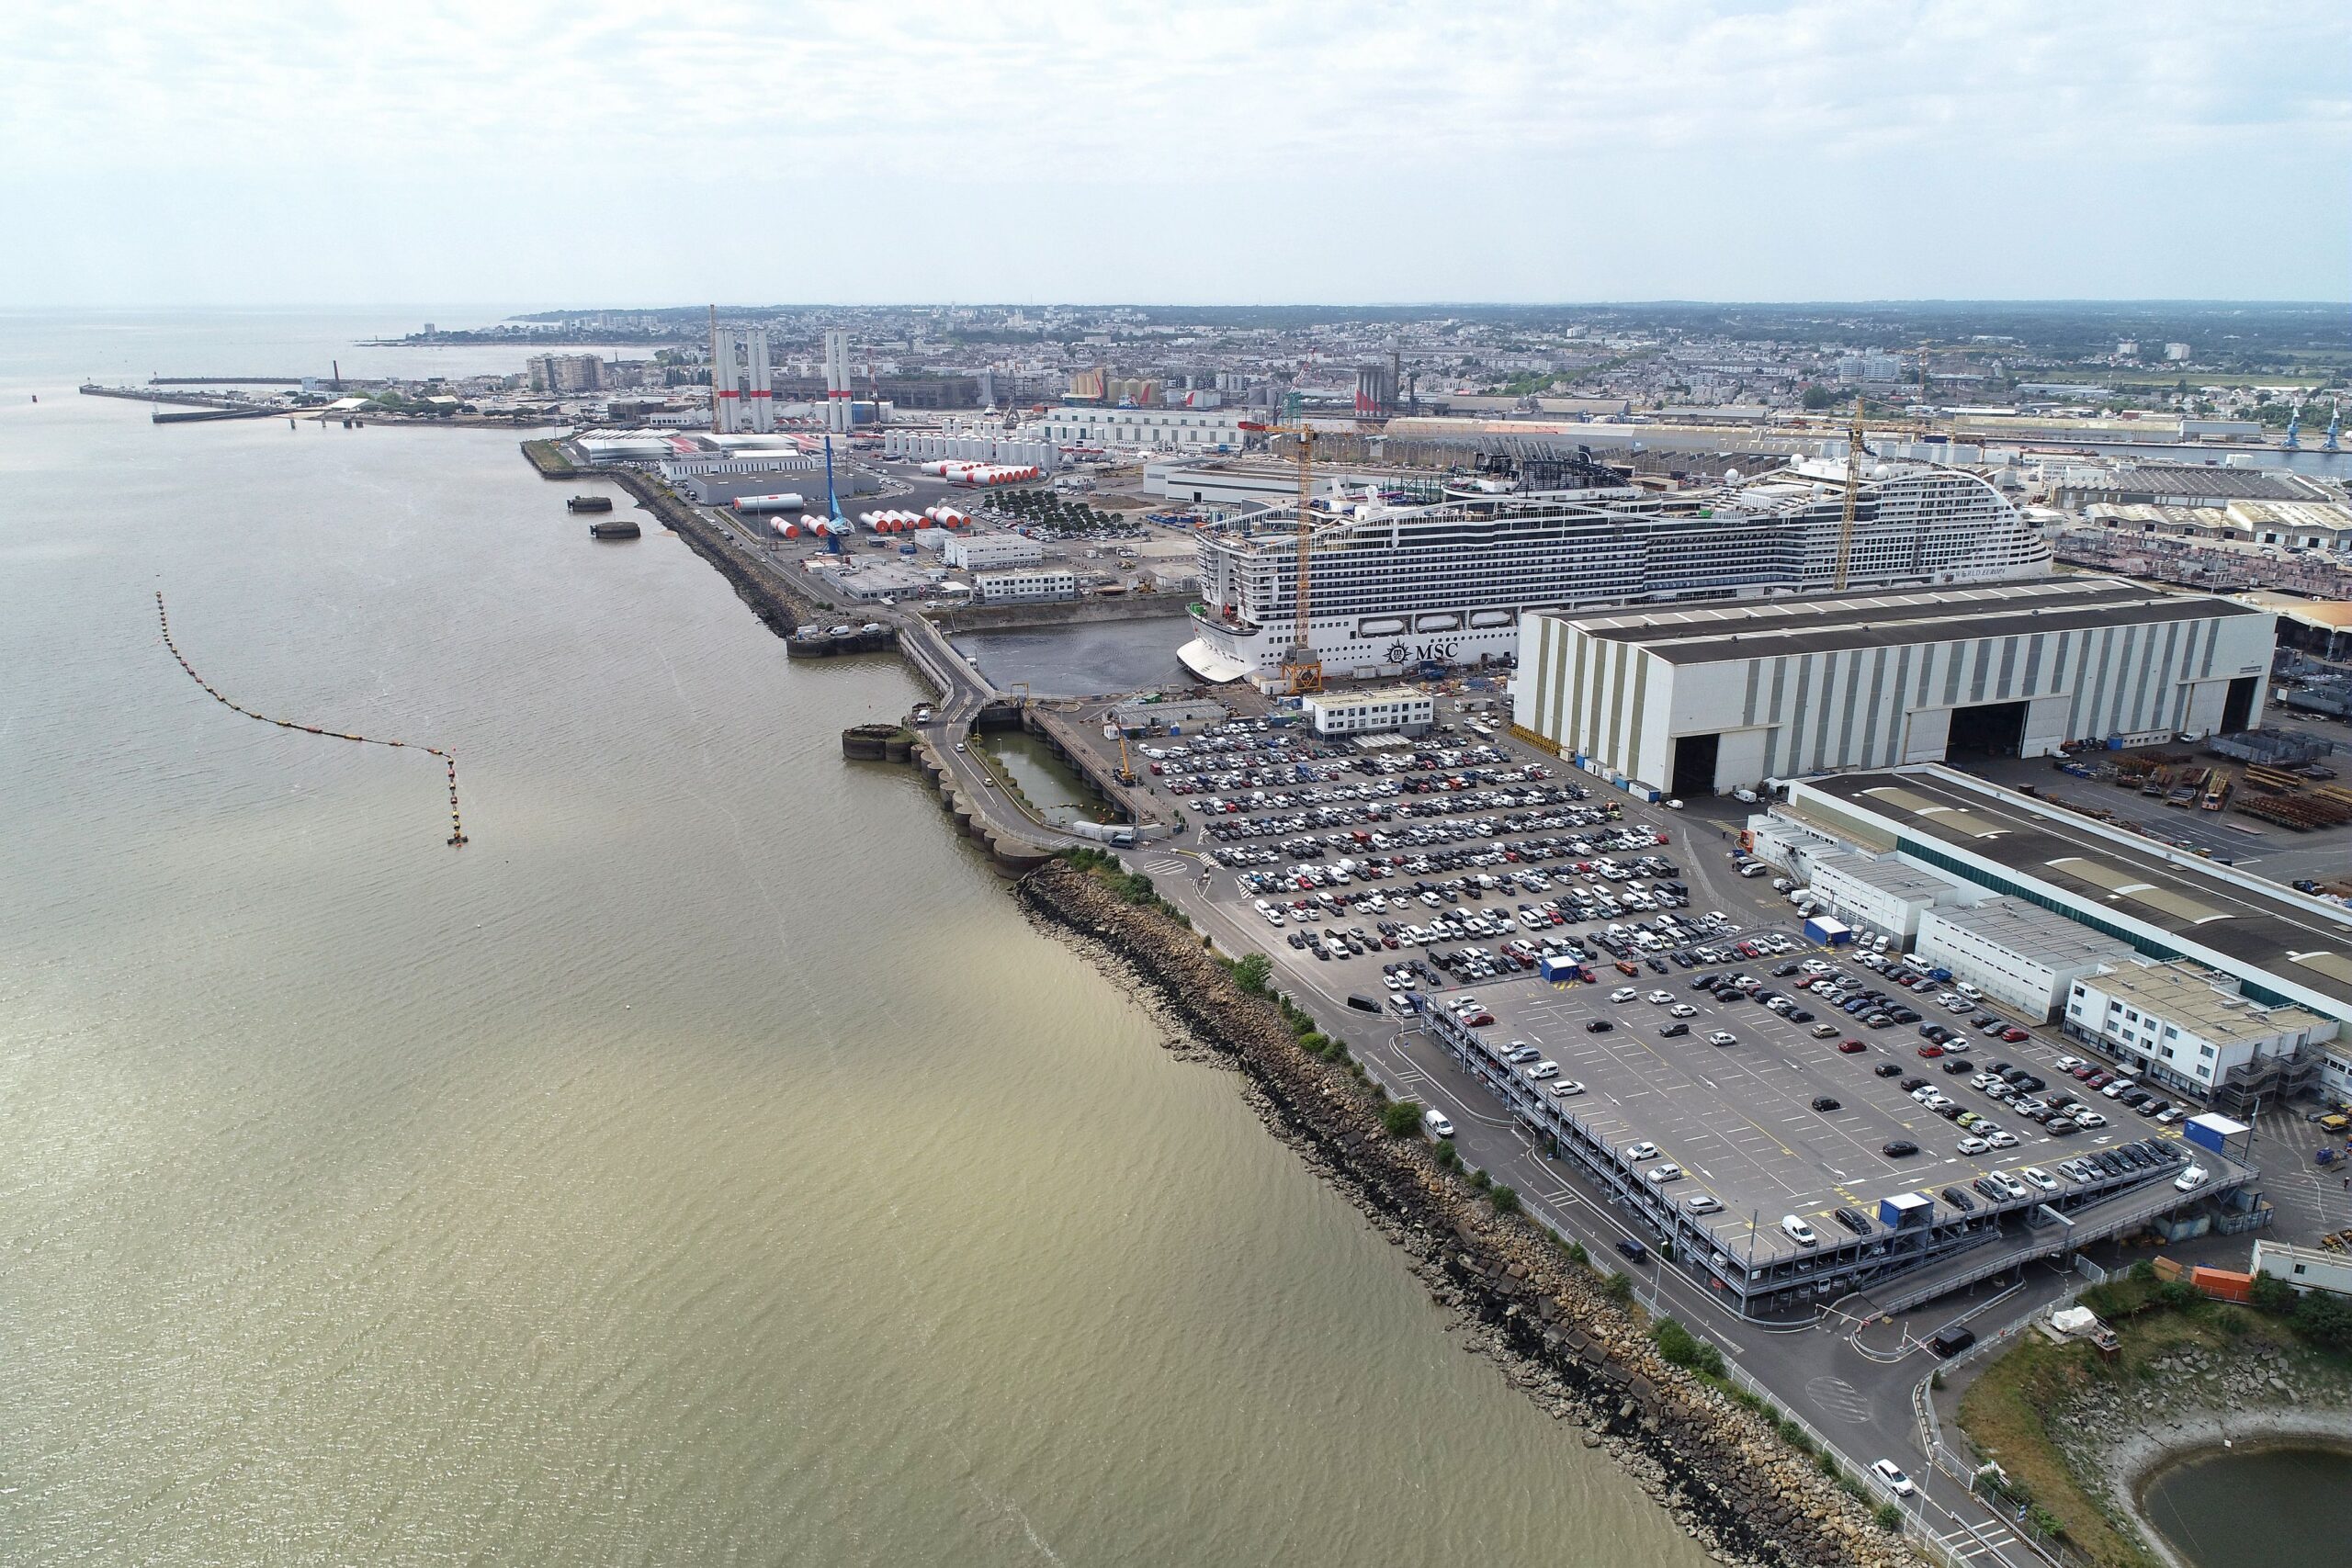 Aerial view of the shipyard looking towards the town itself